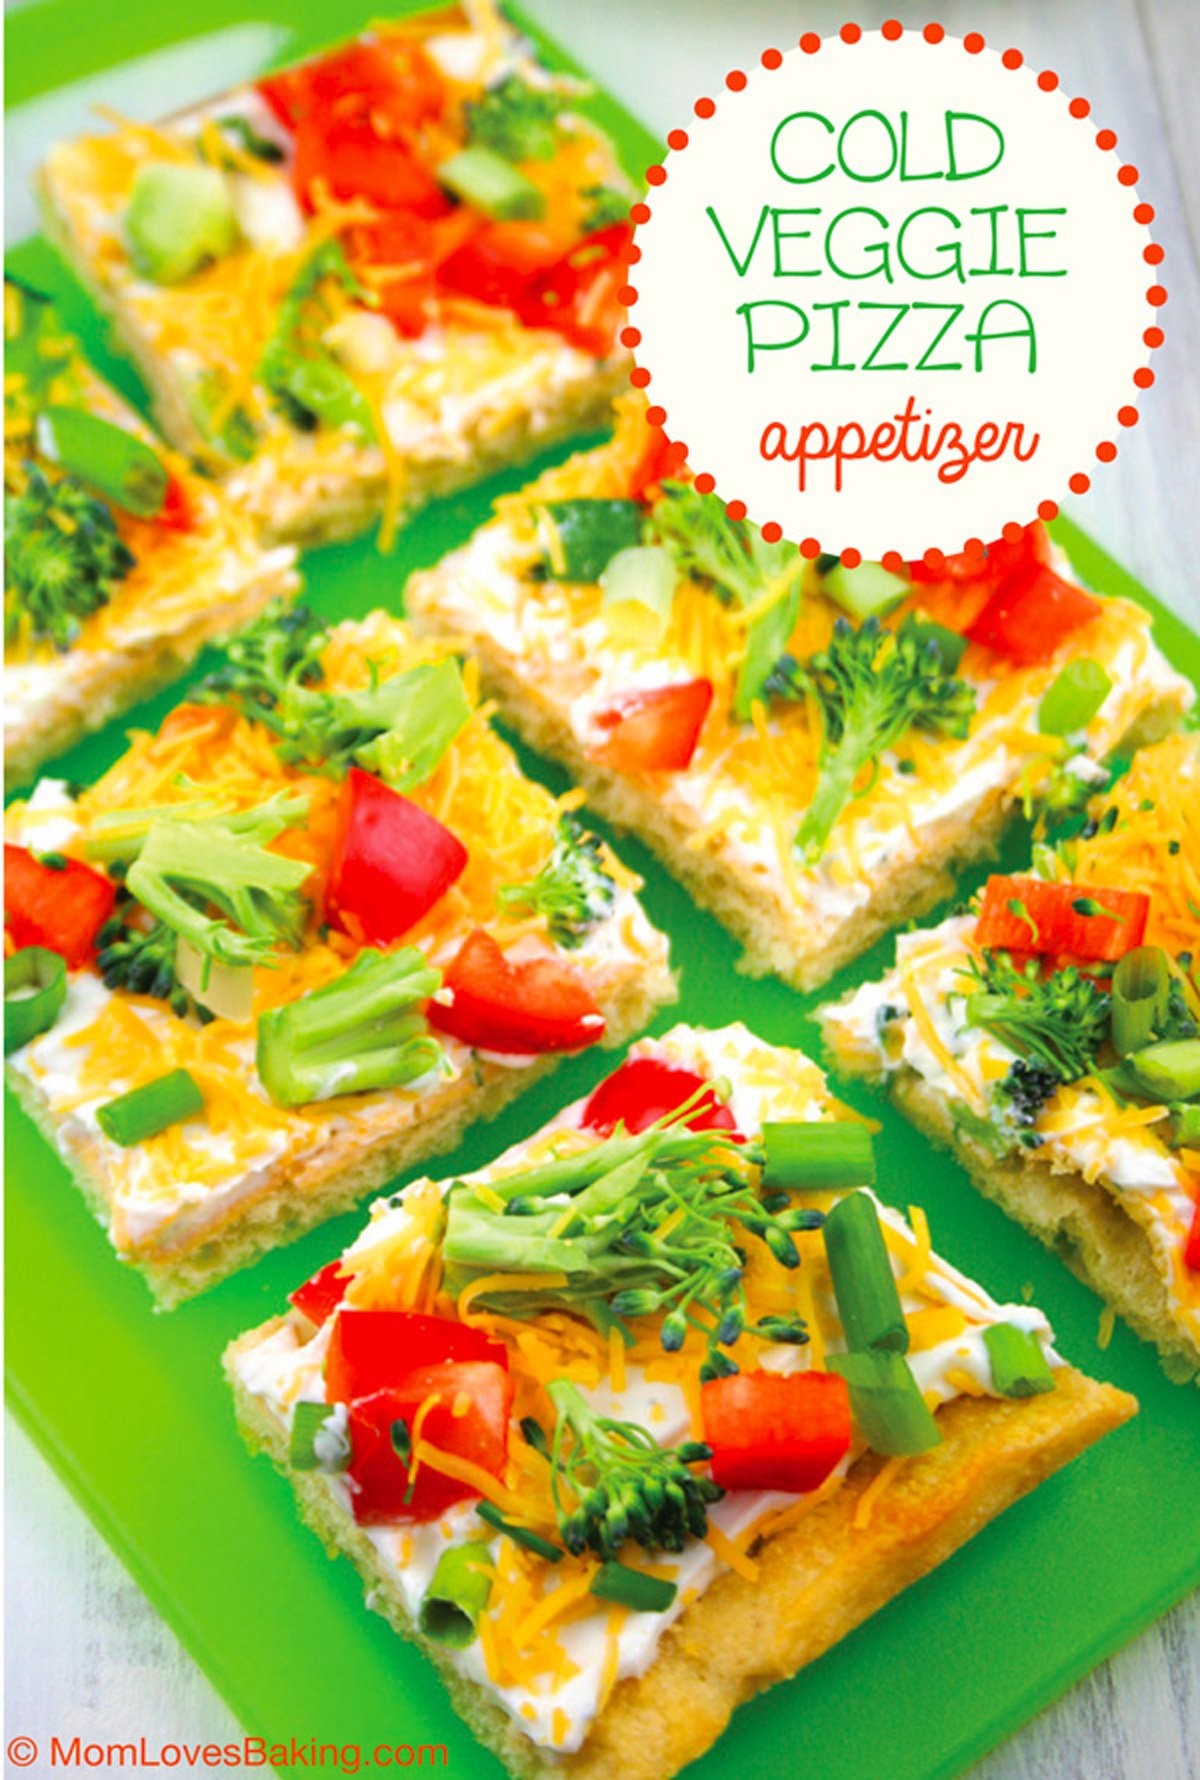 Yummy pizza appetizer on a green cutting board.